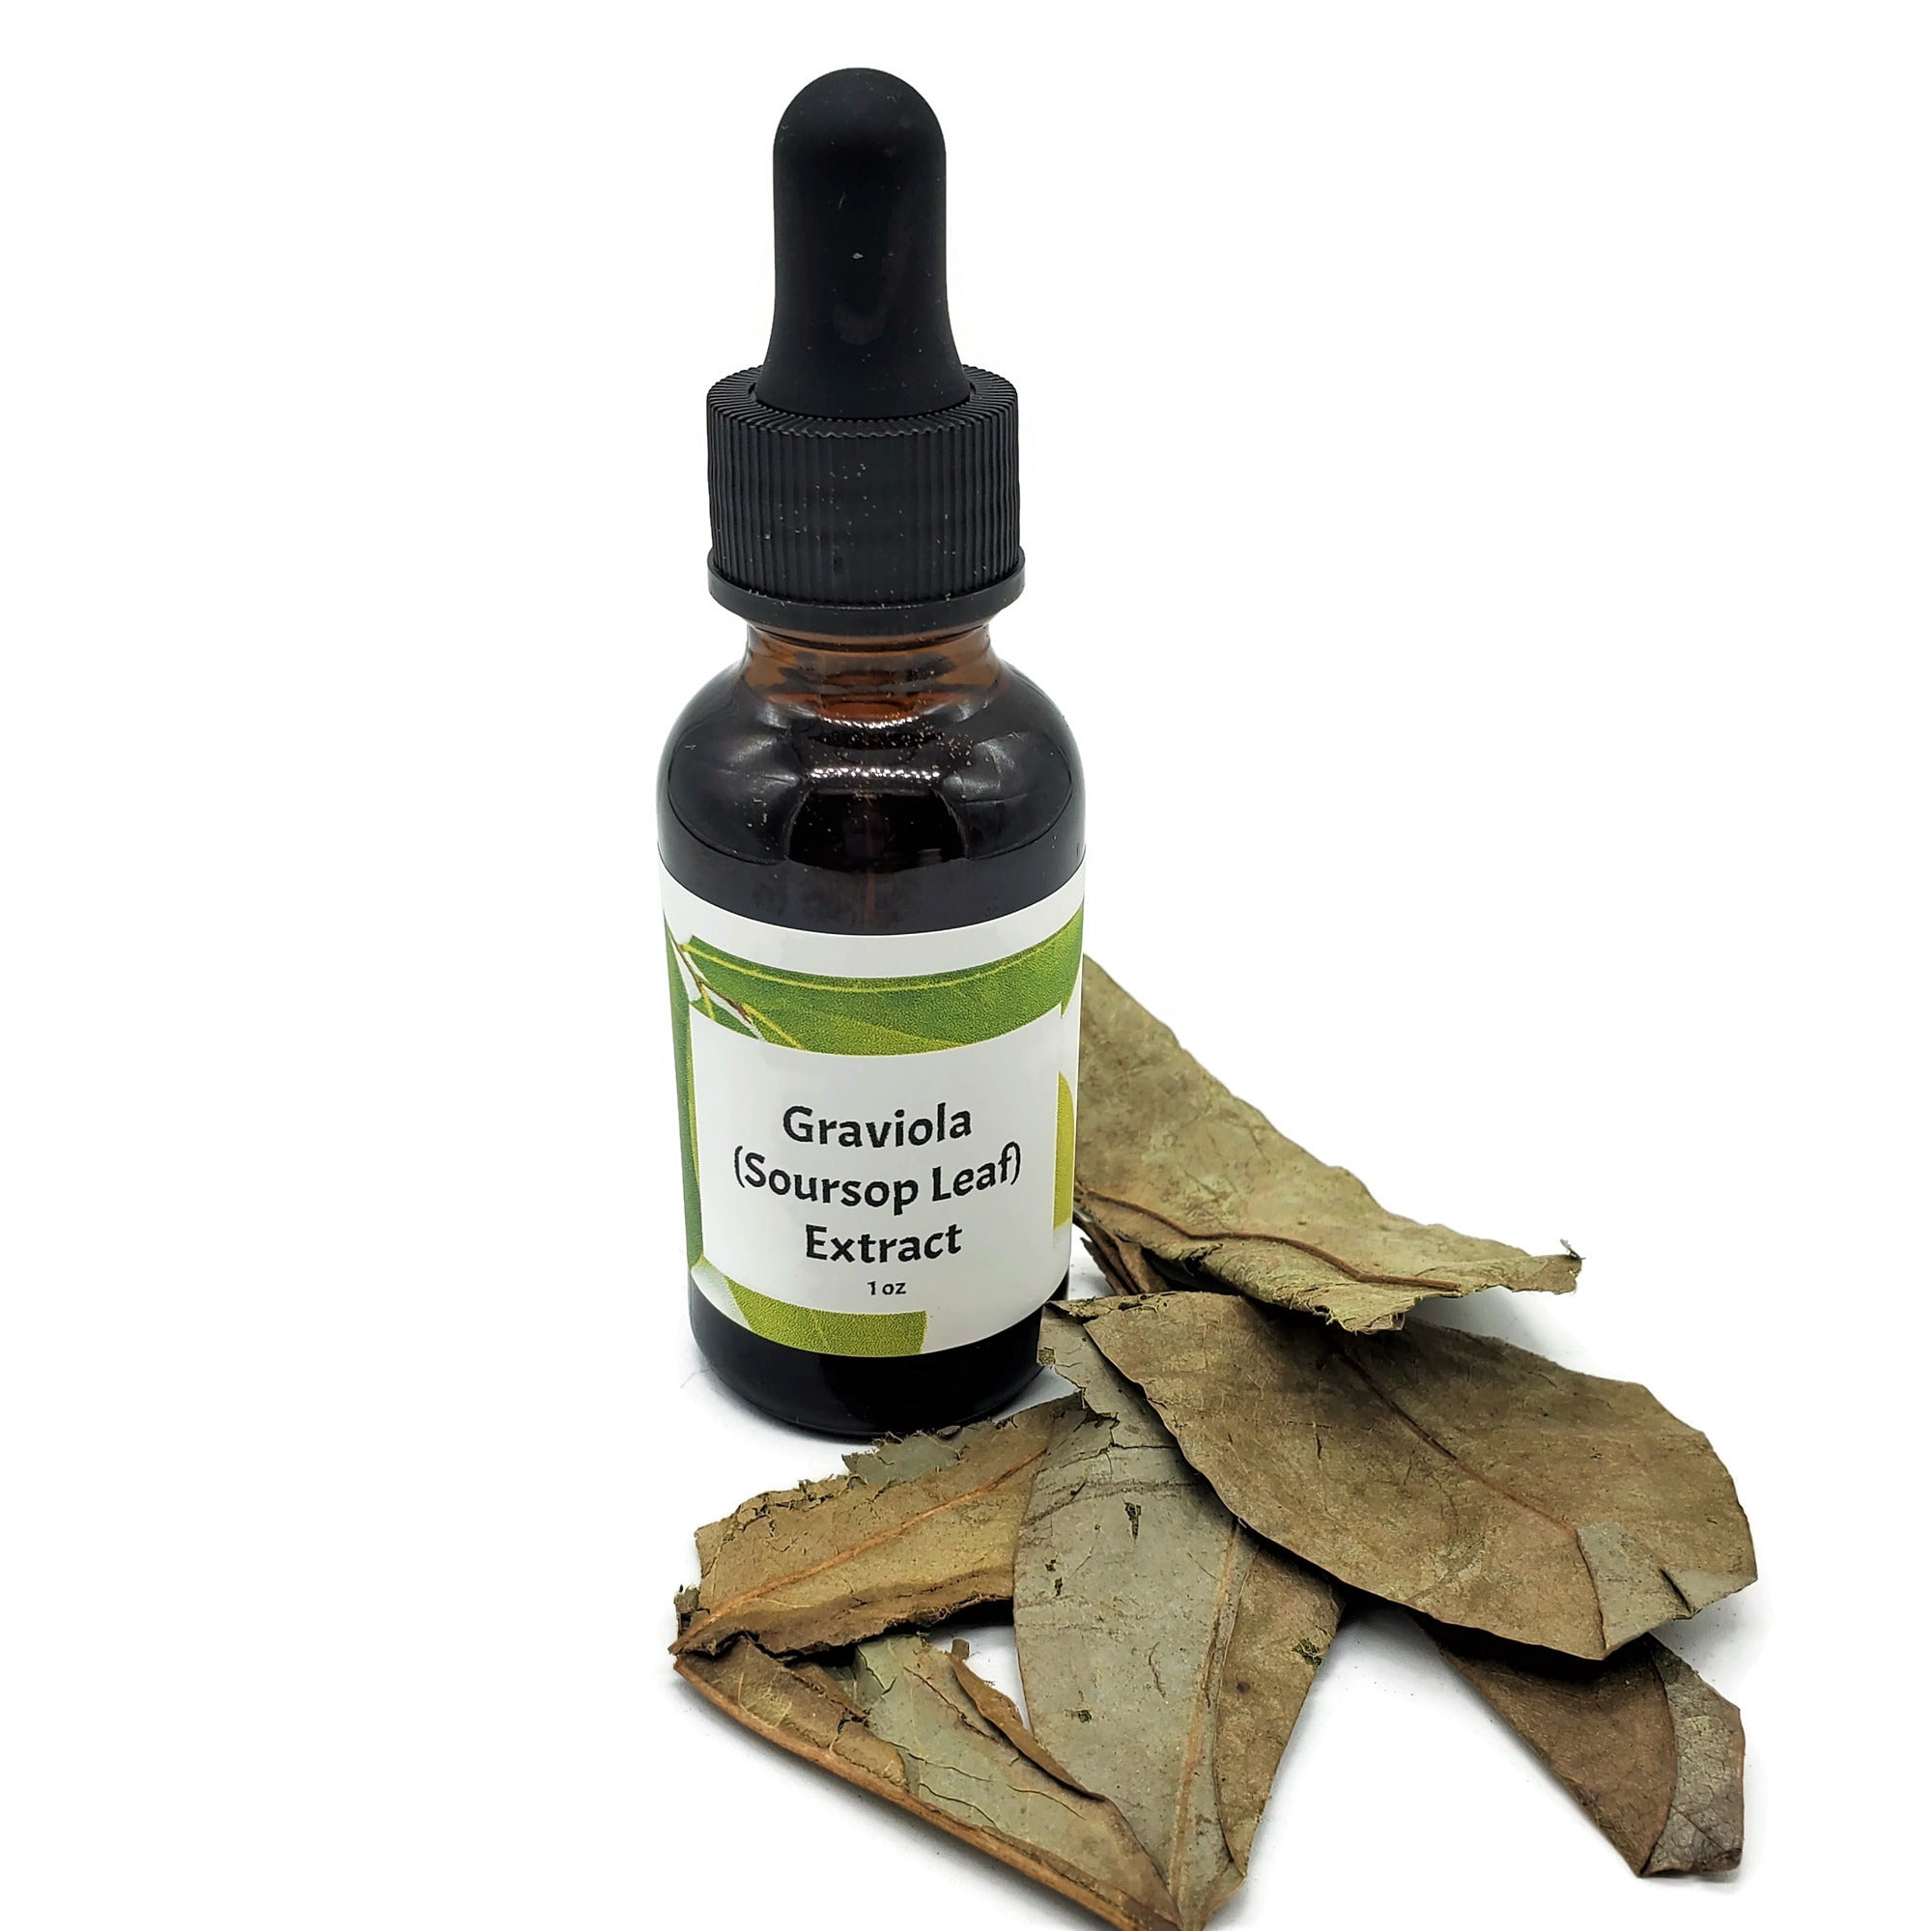 Soursop Leaf Extract